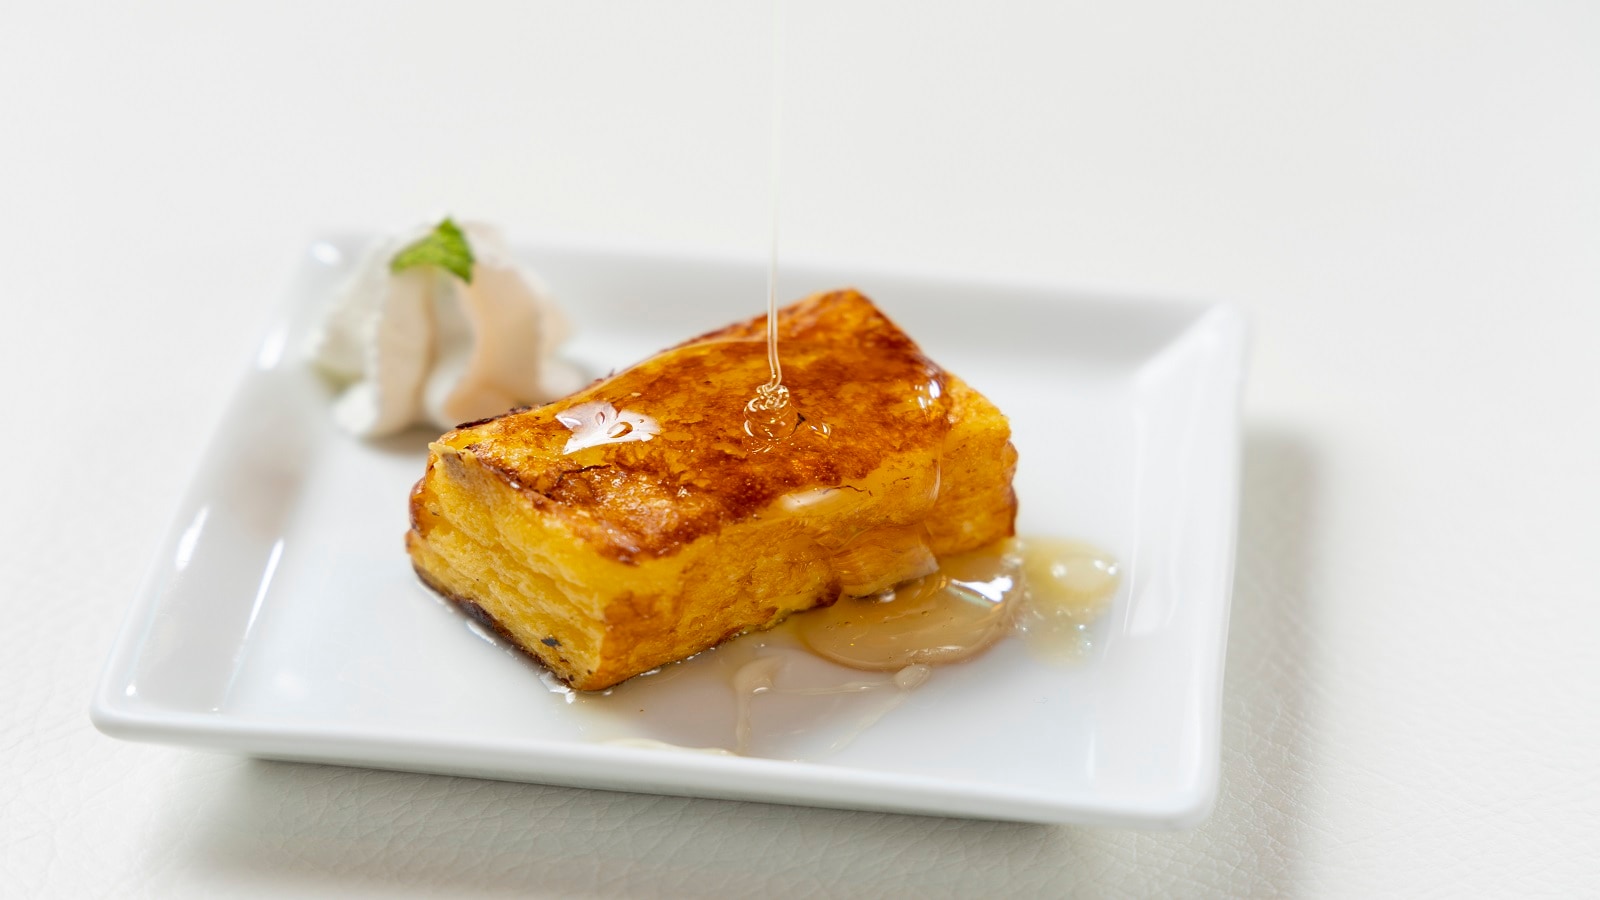 The rumored French toast that has won a prize at the breakfast festival sponsored by Rakuten ♪